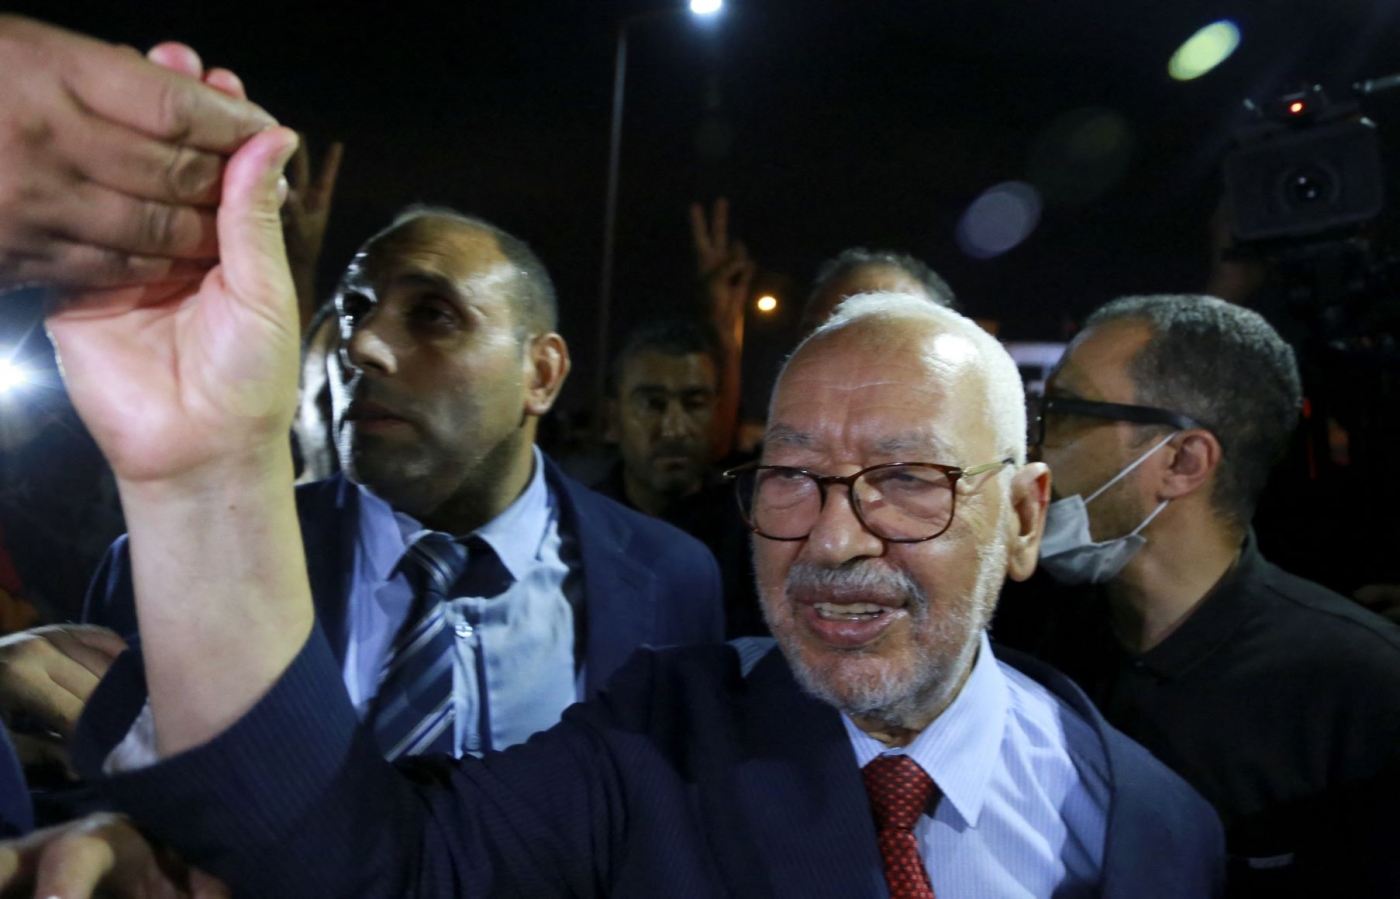 Rachid Ghannouchi, head of Tunisia's Islamist Ennahda party, greets his supporters as he leaves the office of Tunisia's counter-terrorism prosecutor in Tunis on July 19, 2022 (AFP)